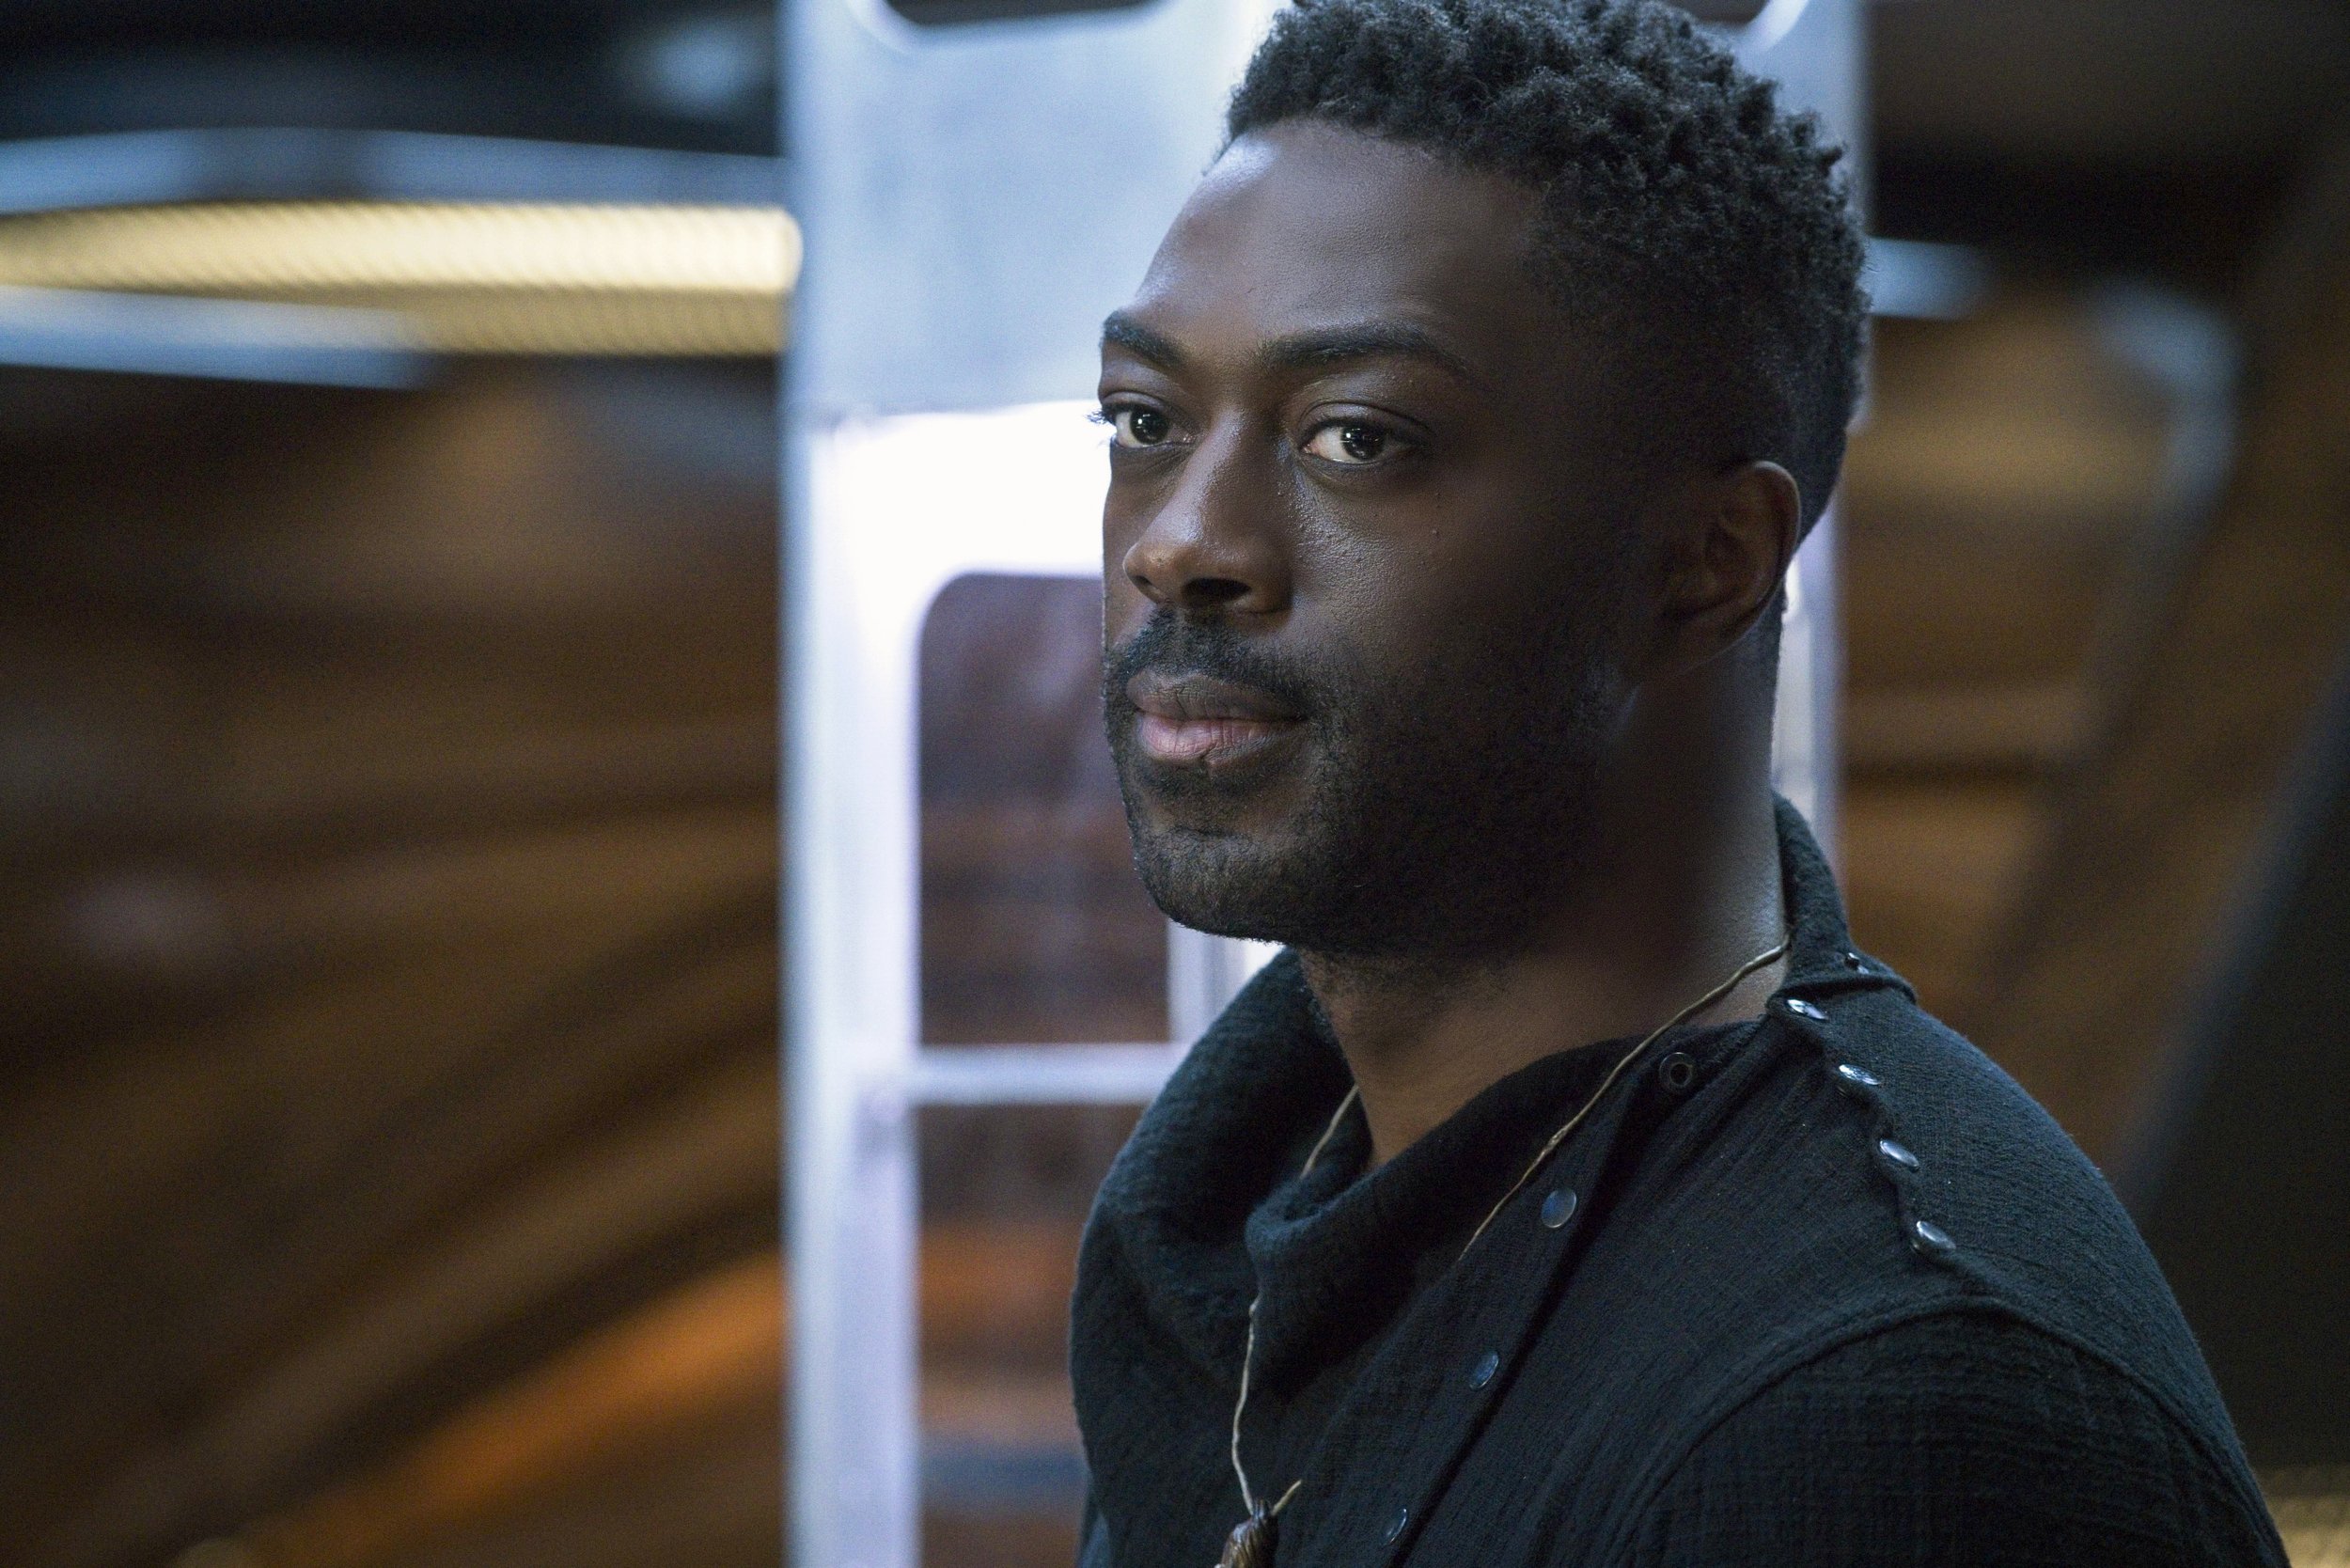   Pictured: David Ajala as Book of the Paramount+ original series STAR TREK: DISCOVERY. Photo Cr: Michael Gibson/Paramount+ (C) 2021 CBS Interactive. All Rights Reserved.  